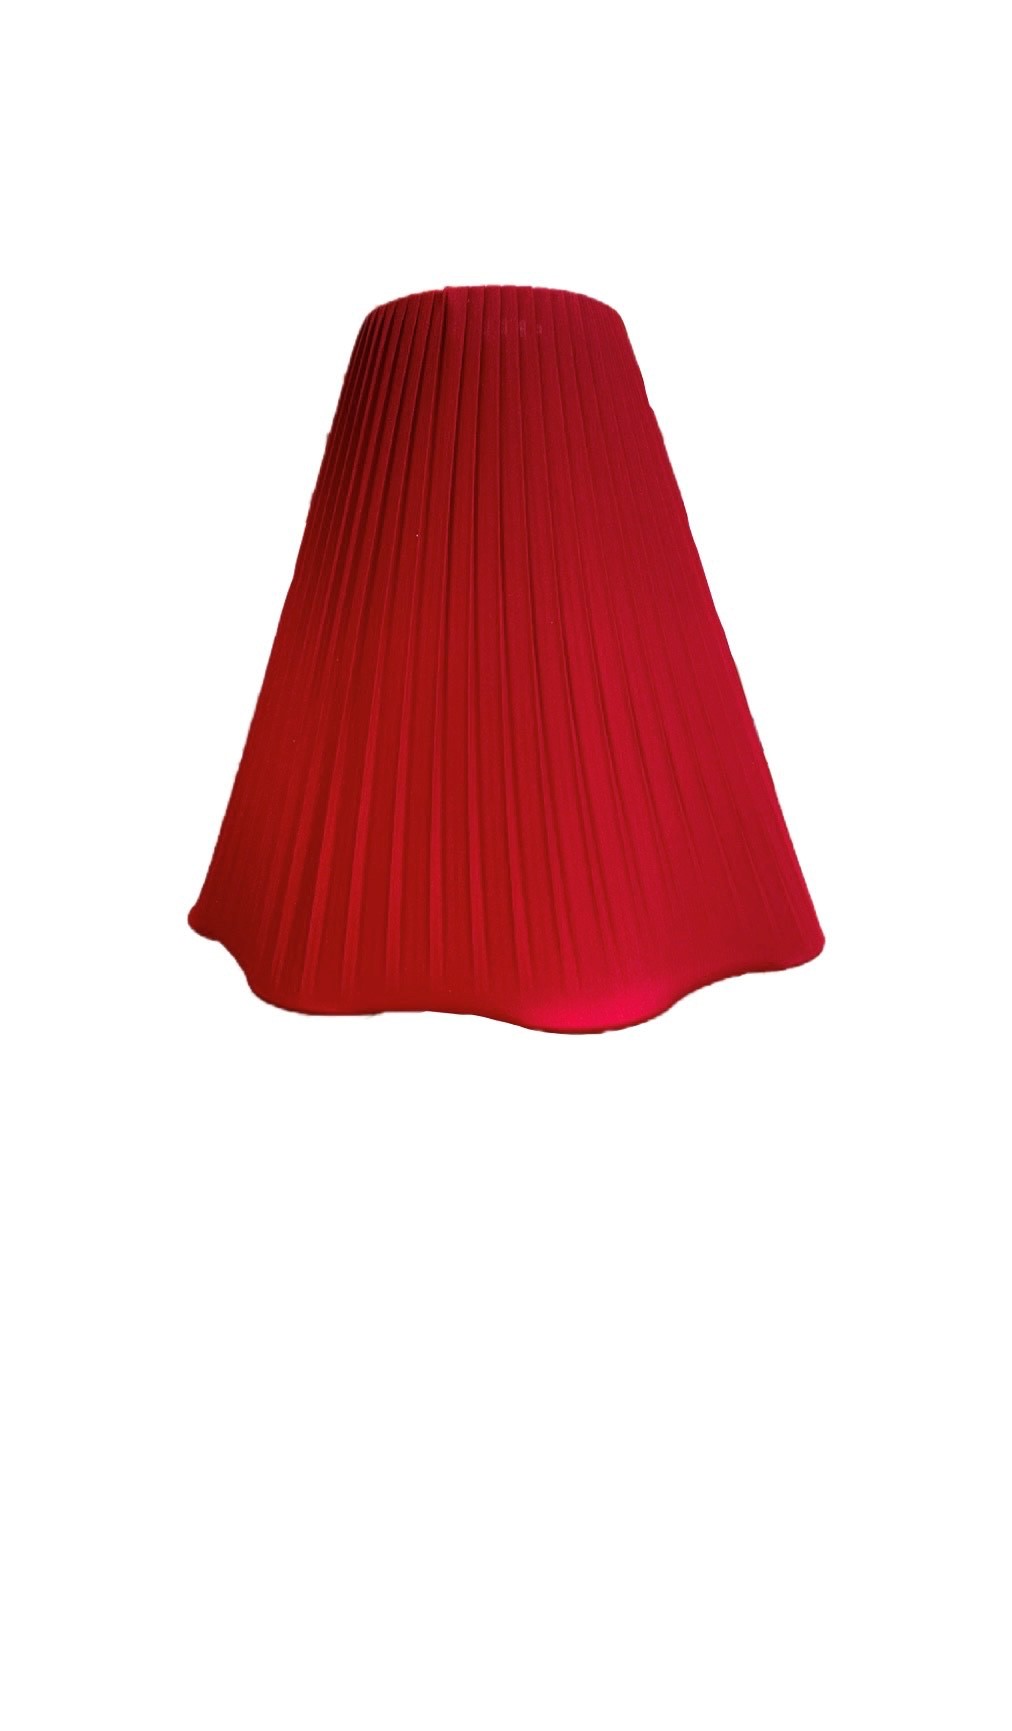 hallbergs Lampshade Red